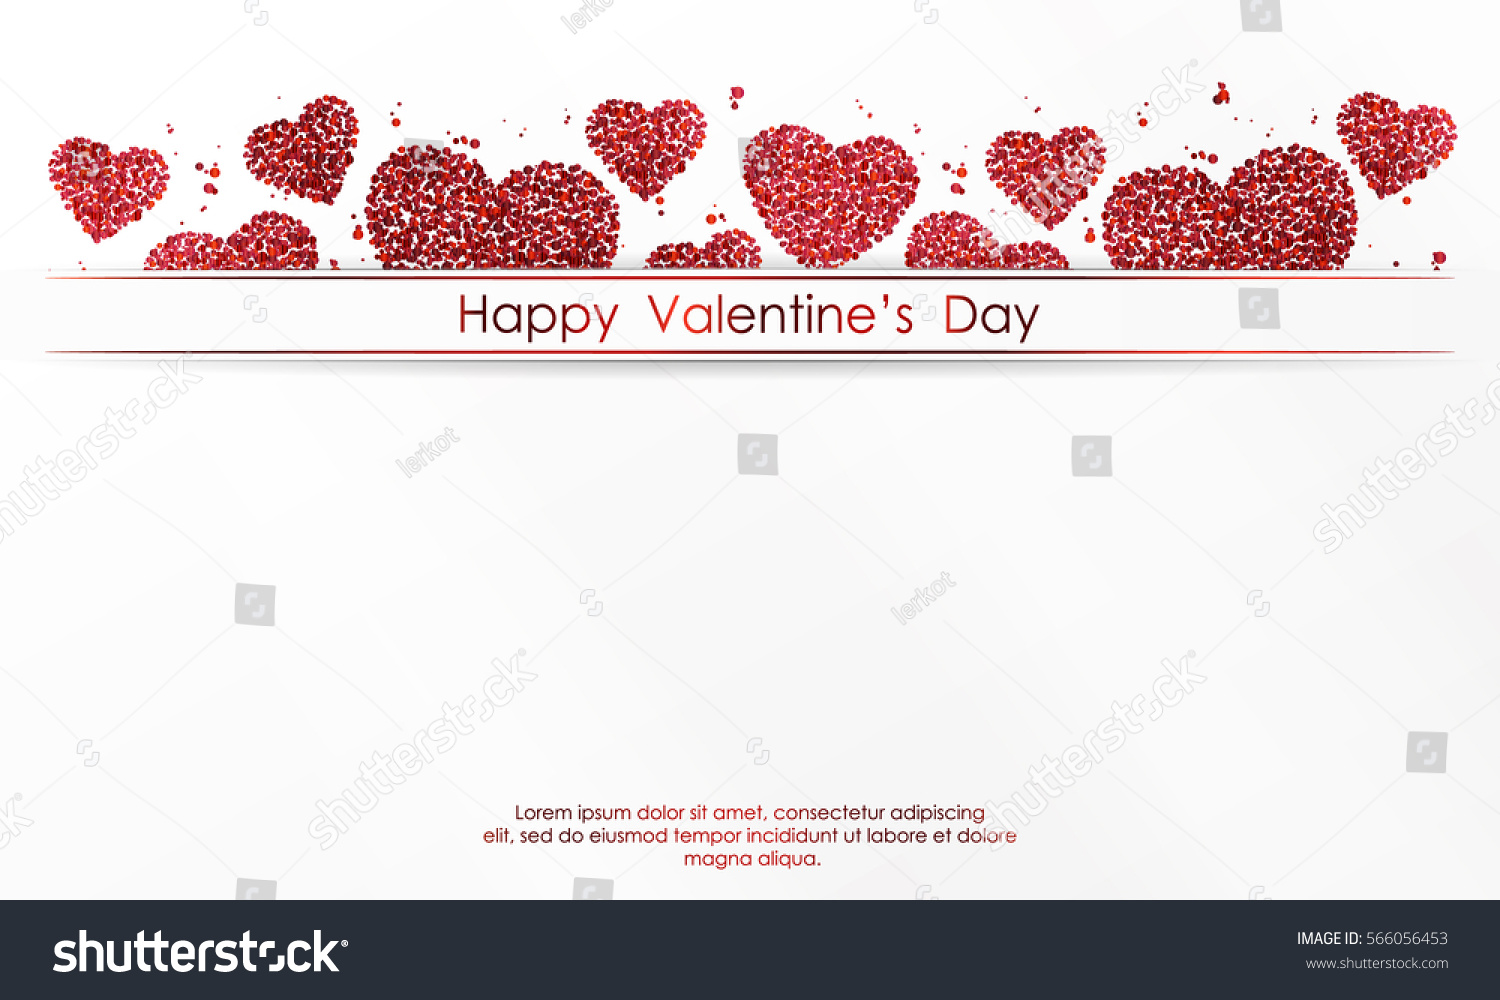 Poster with hearts of red confetti, sparkles, glitter and lettering Happy Valentines Day on white background. Wallpaper for Valentines Day. Vector illustration. #566056453